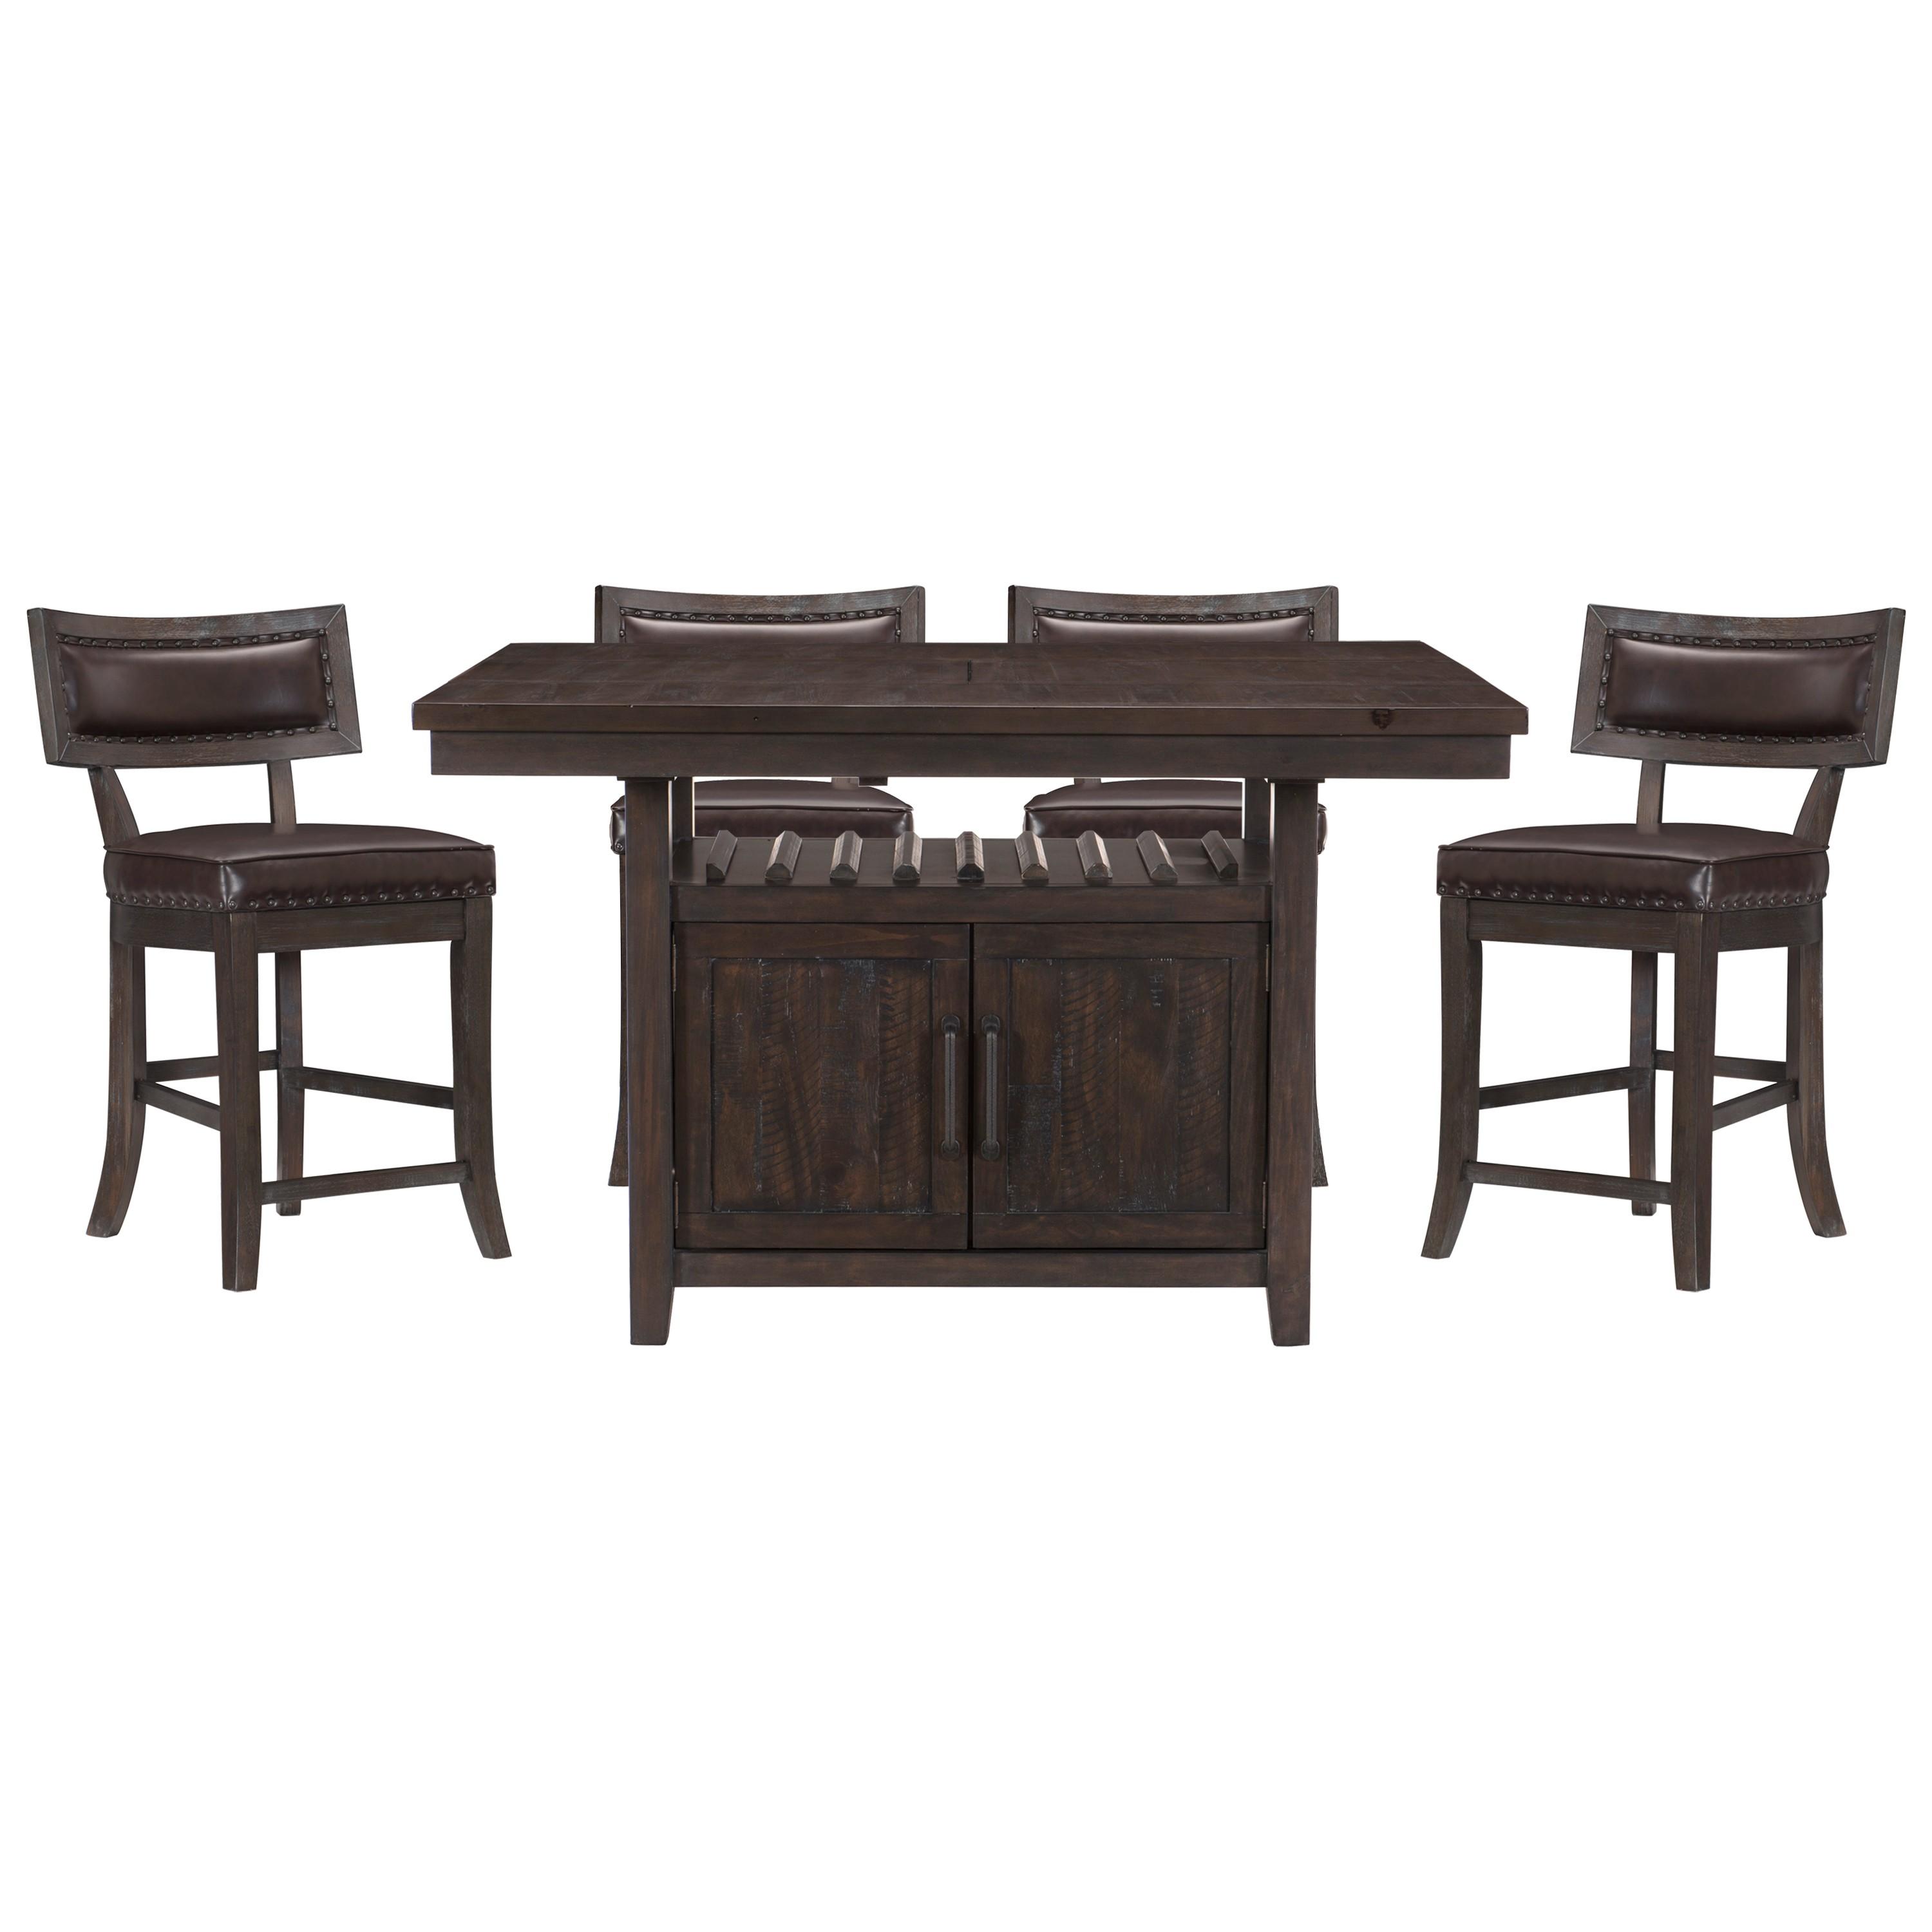 Rustic Dining Room Set 5655-36*5PC Oxton 5655-36*5PC in Dark Cherry Faux Leather